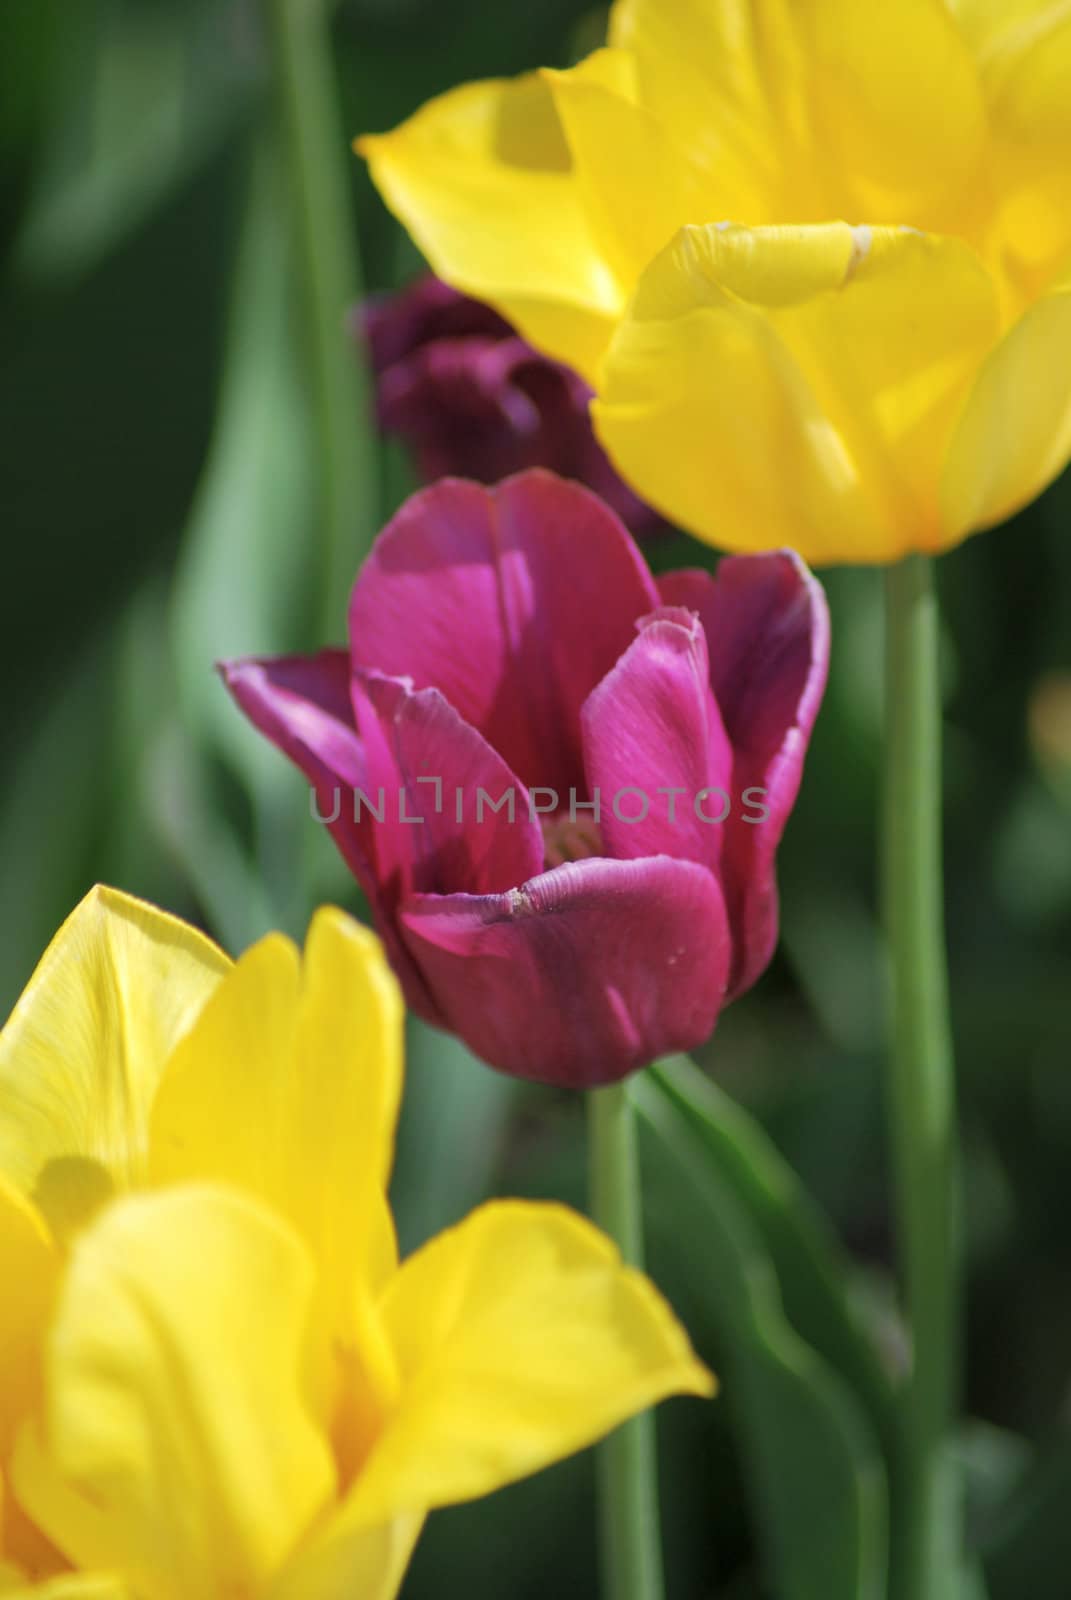 One violet tulip and two yellow tulips ,flowers background by svtrotof